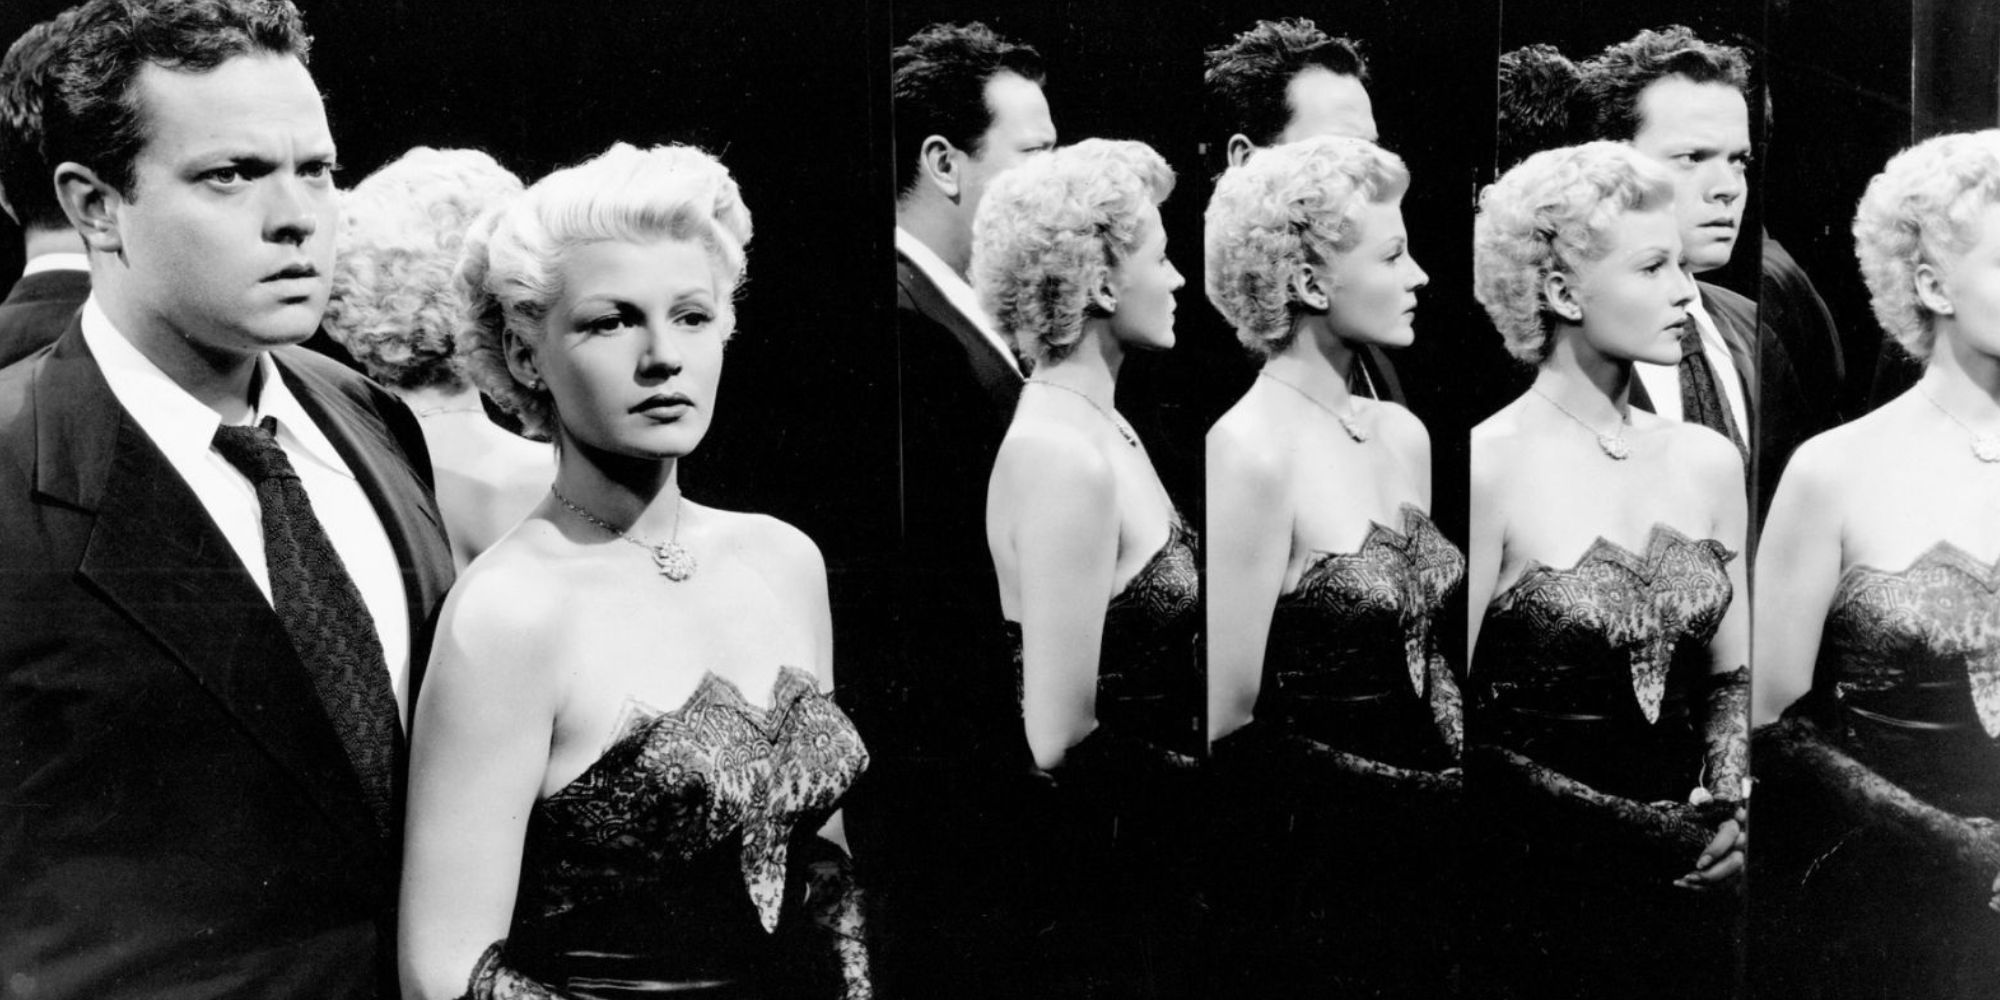 Orson Welles and Rita Hayworth standing together in The Lady from Shanghai